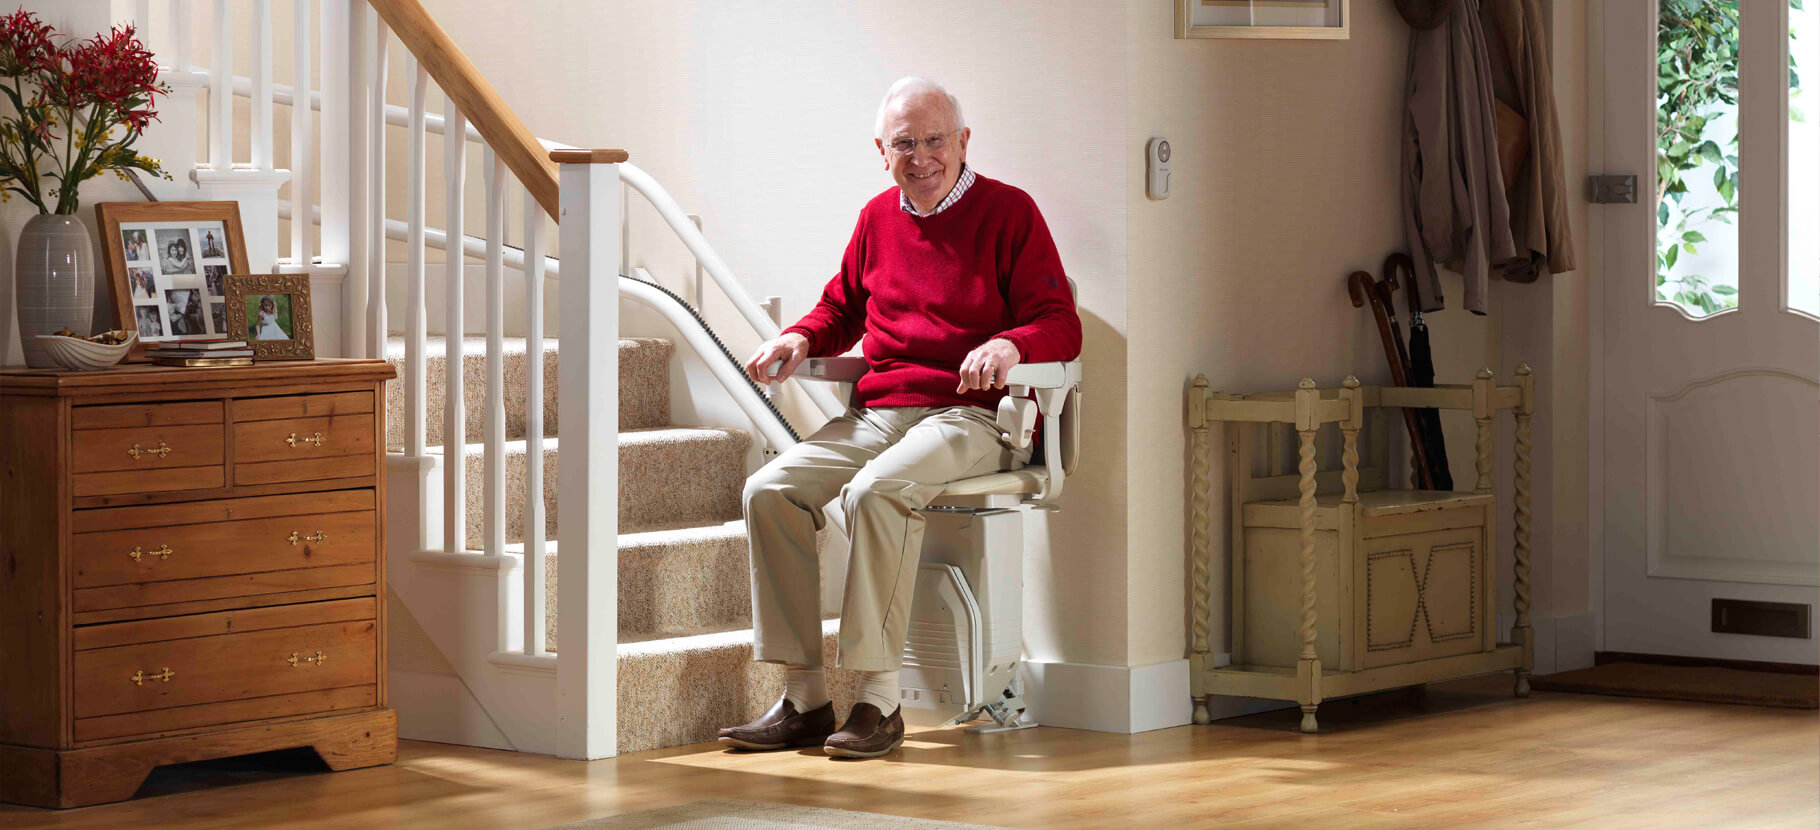 Stannah-Stairlift-3_CategoryPage.jpg